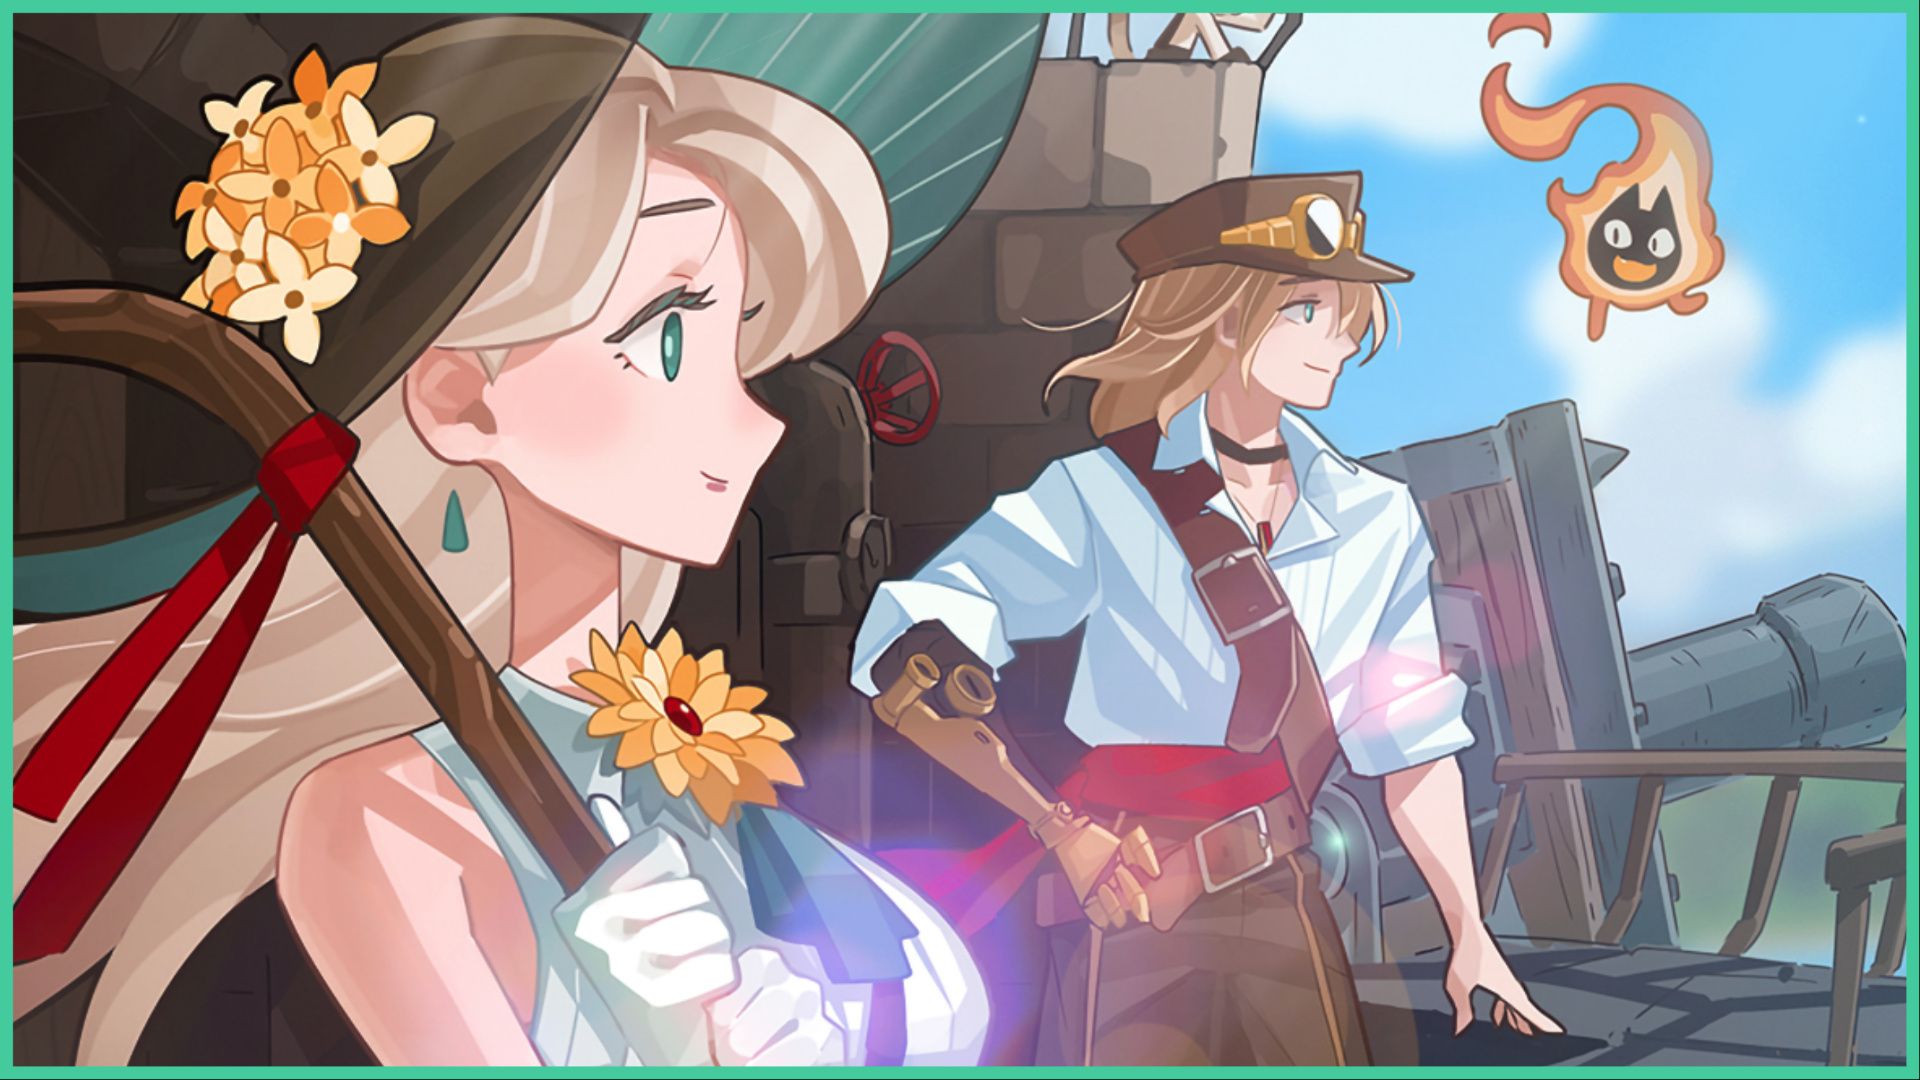 feature image for our fortress saga tier list, the image features promo art for the game of a female and male character looking out over the side of a ship, the girl is holding an umbrella over her head while smiling, while the guy props his hand on the balcony as his metal robot arm is propped on his hip, there is a floating flame with what looks to be a cat's face